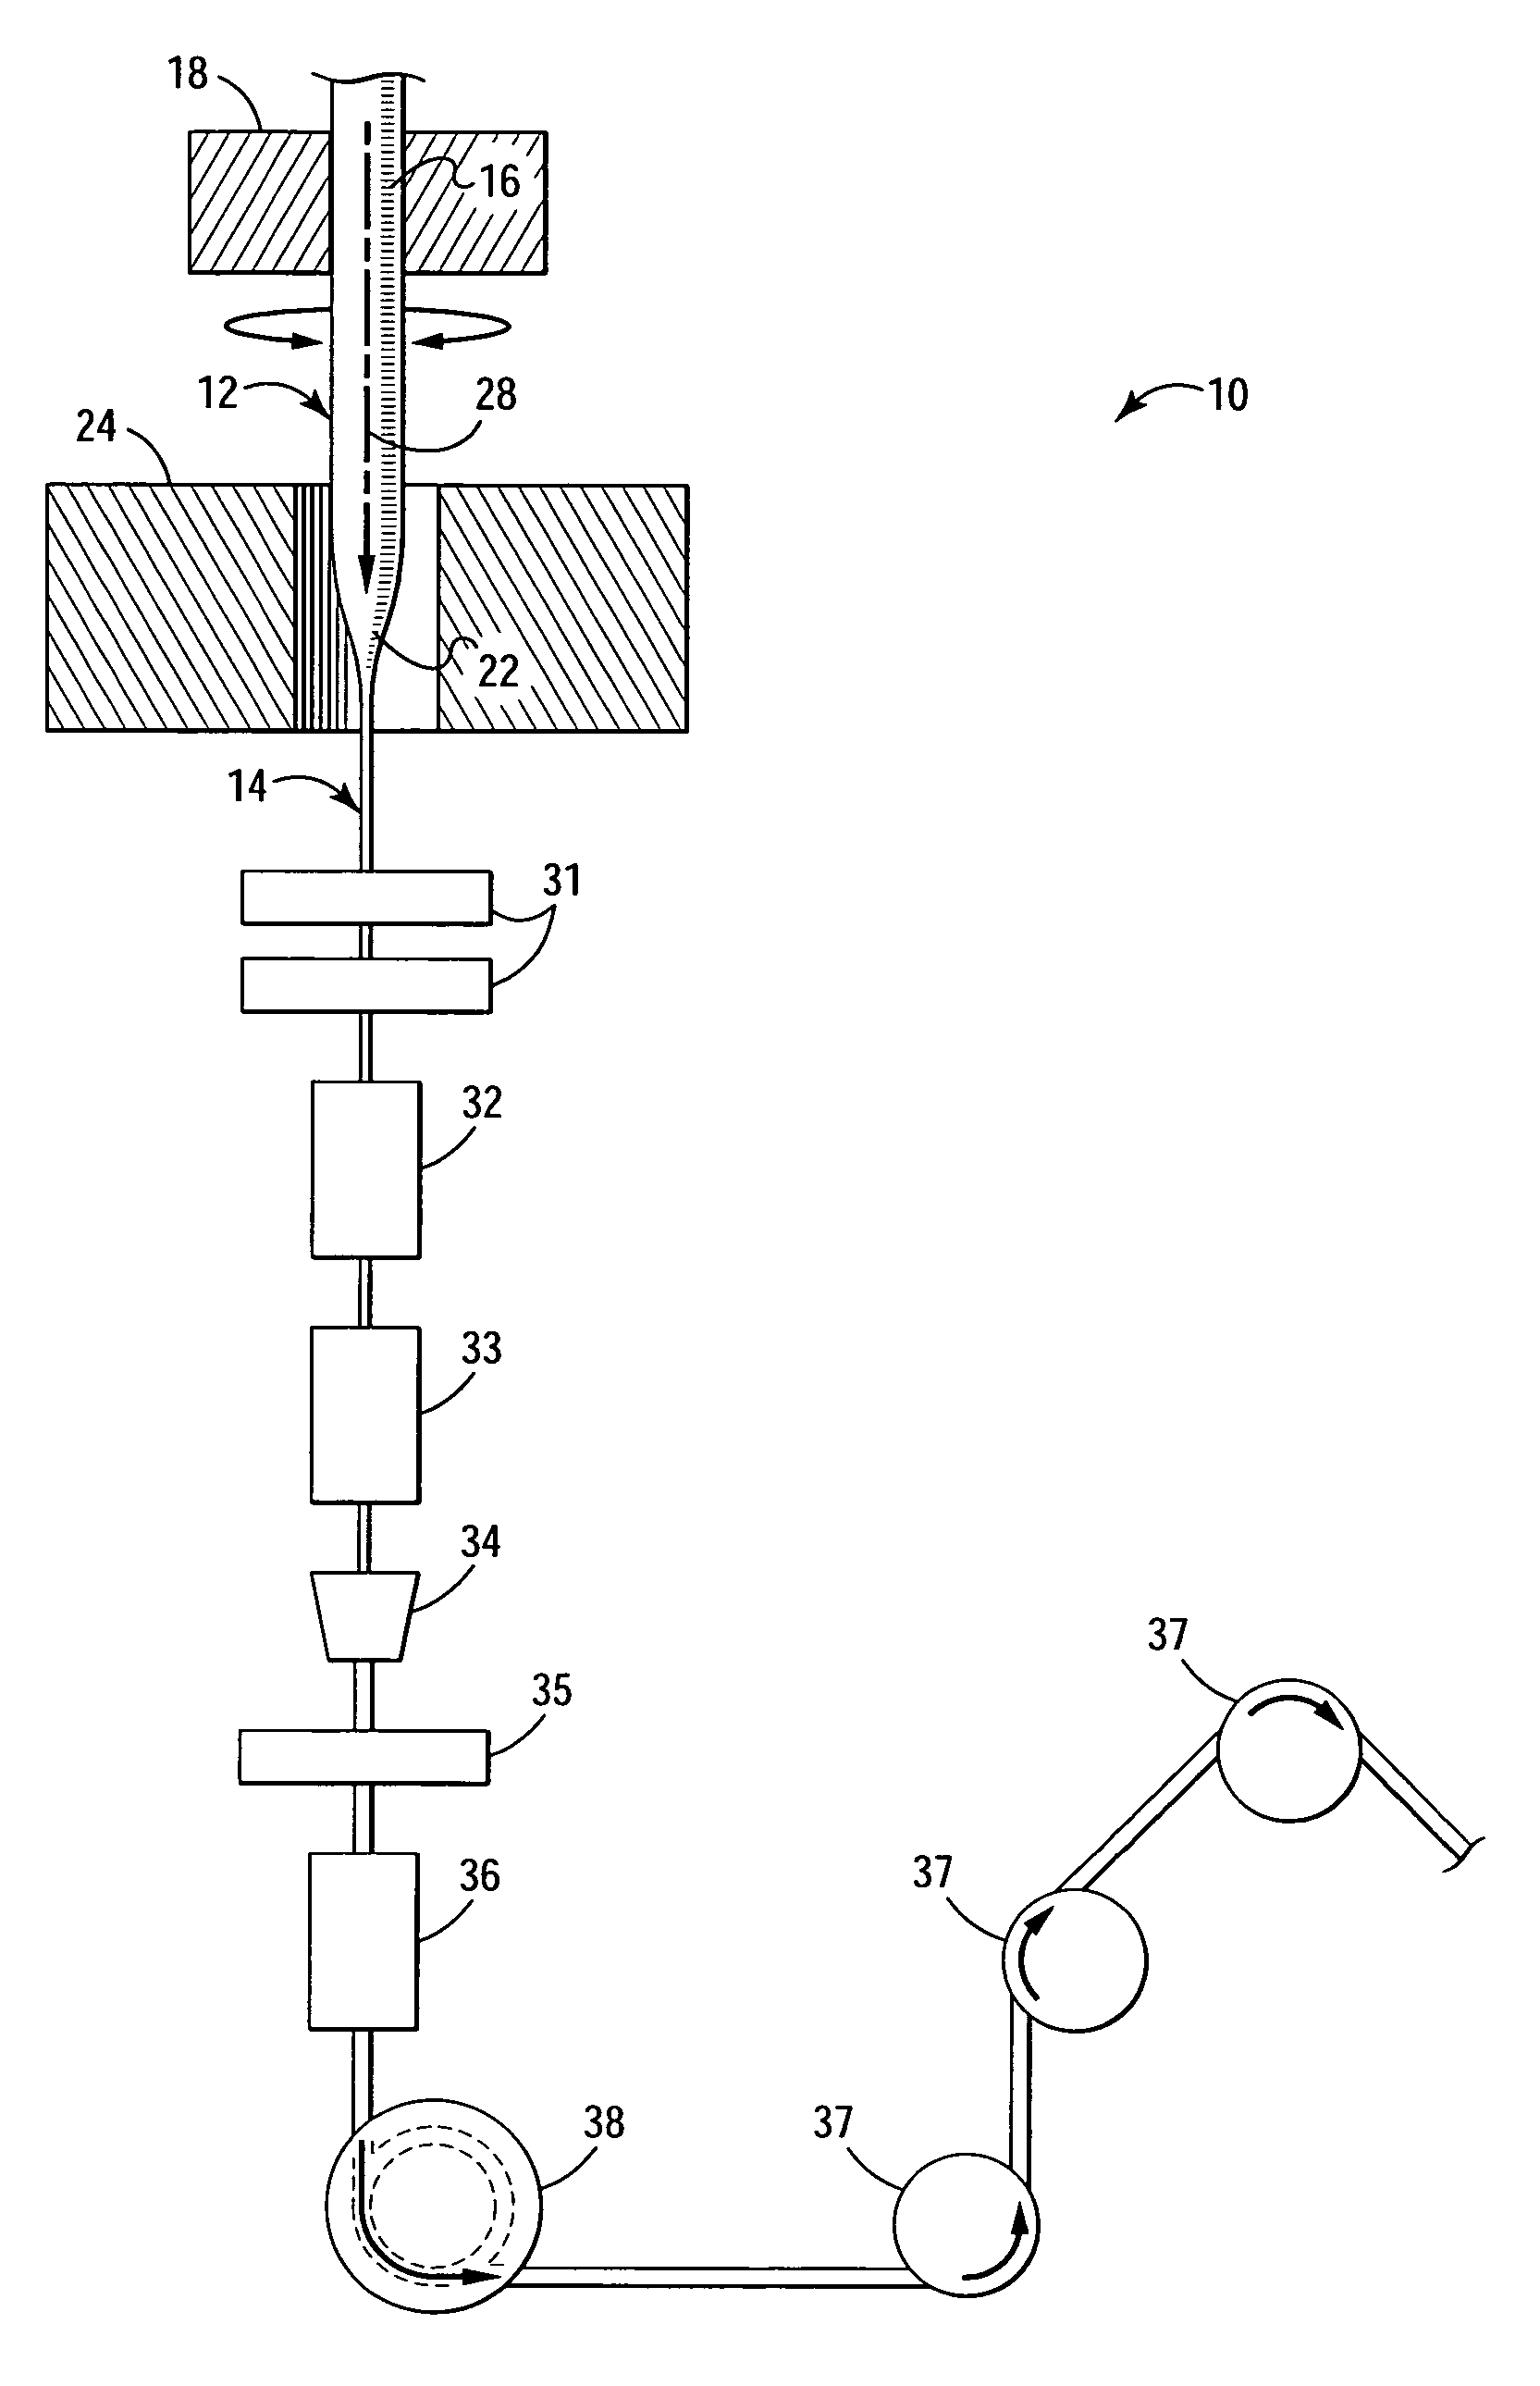 Apparatus and method for manufacturing optical fiber including rotating optical fiber preforms during draw